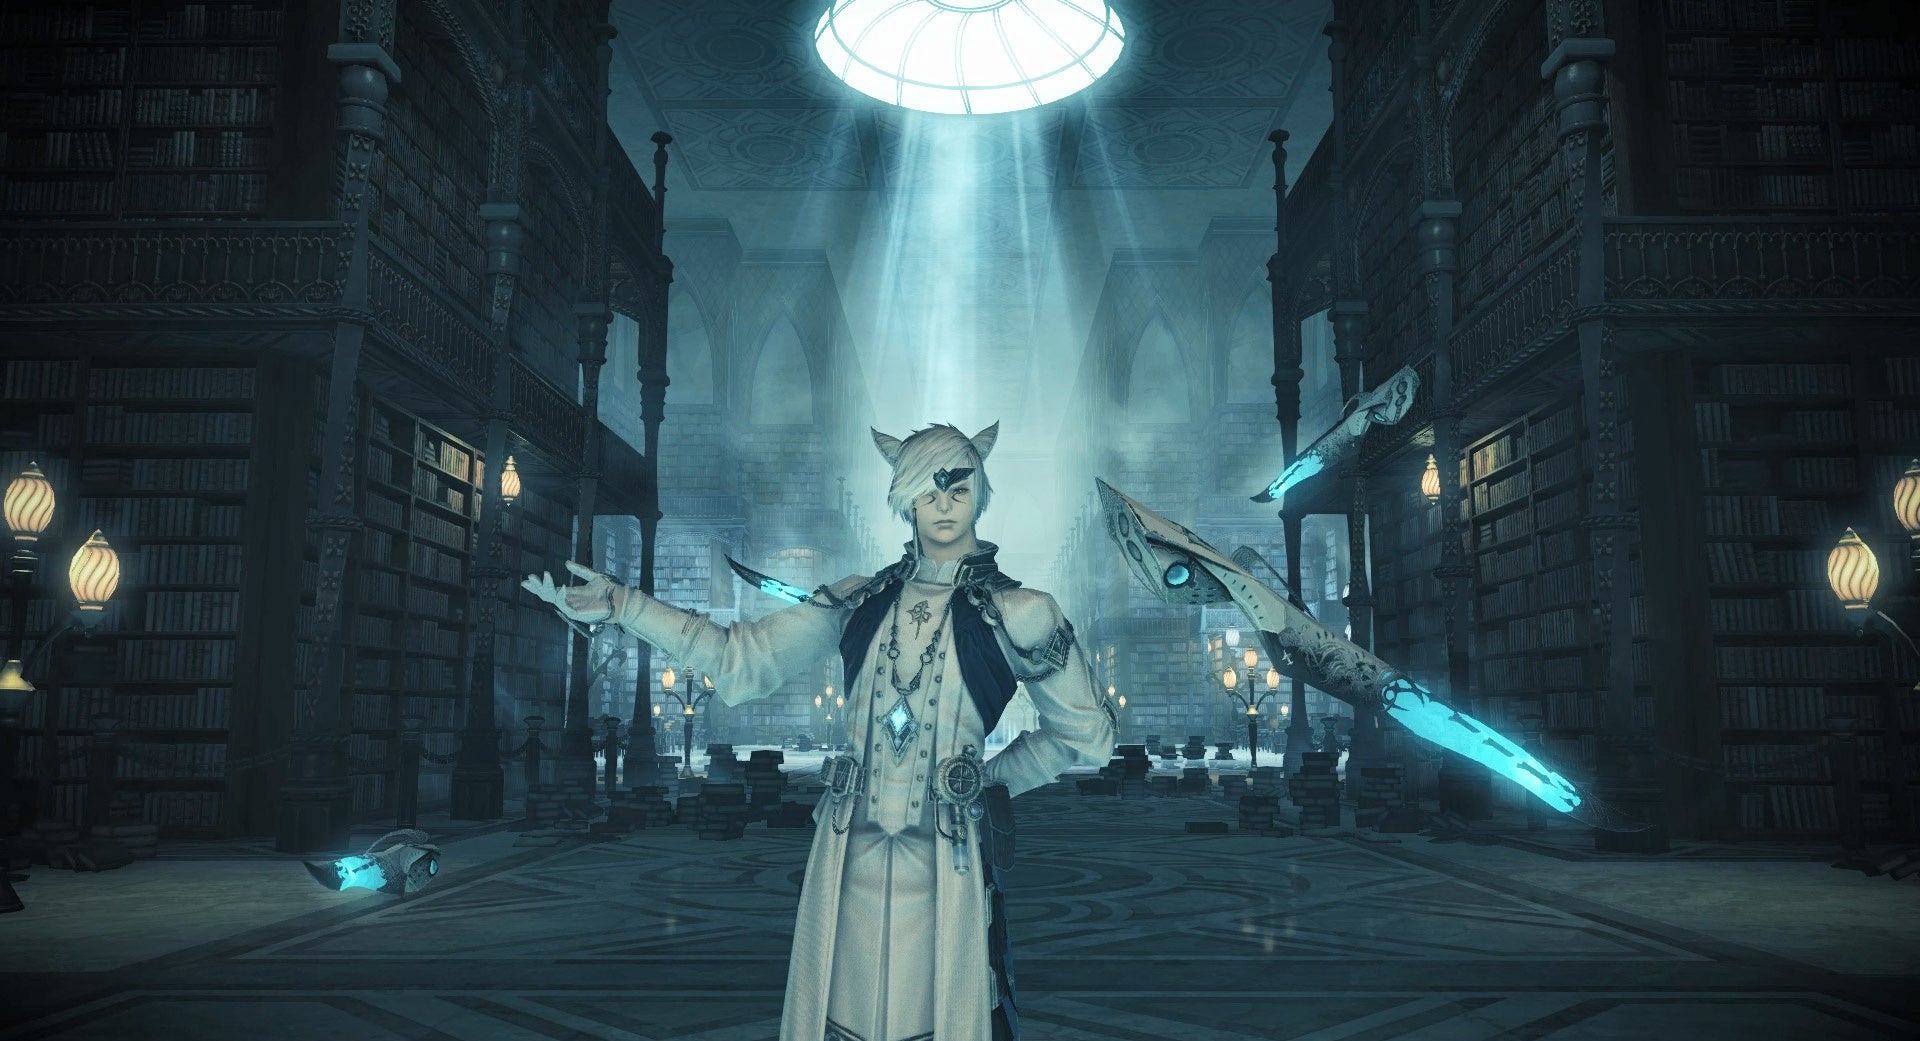 Final Fantasy 14: Endwalker arrives this fall to end the story of the MMO